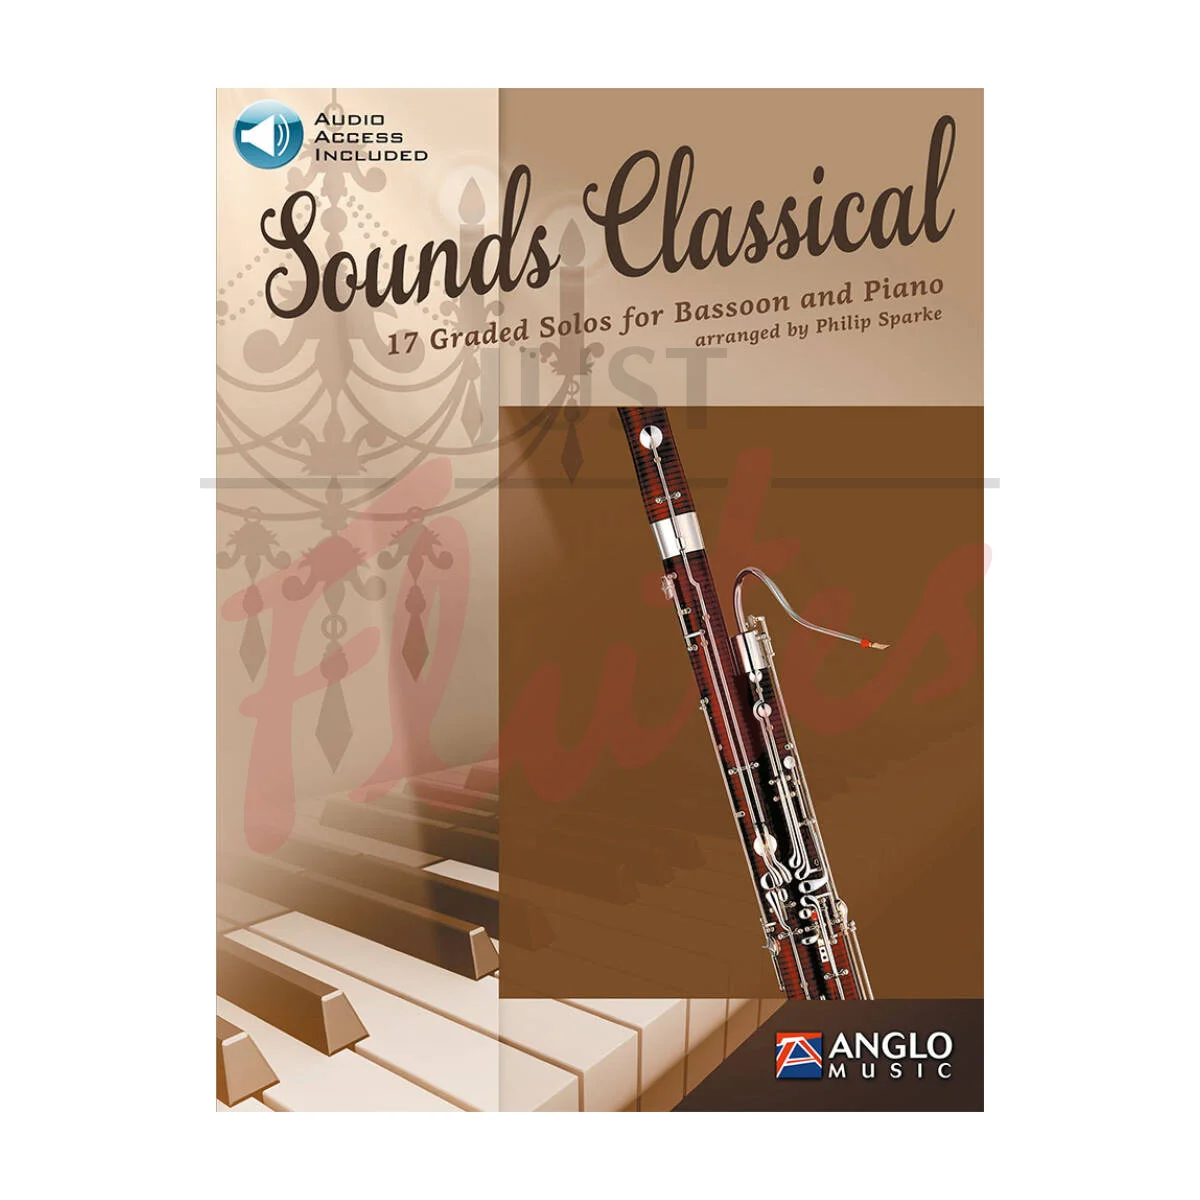 Sounds Classical for Bassoon and Piano